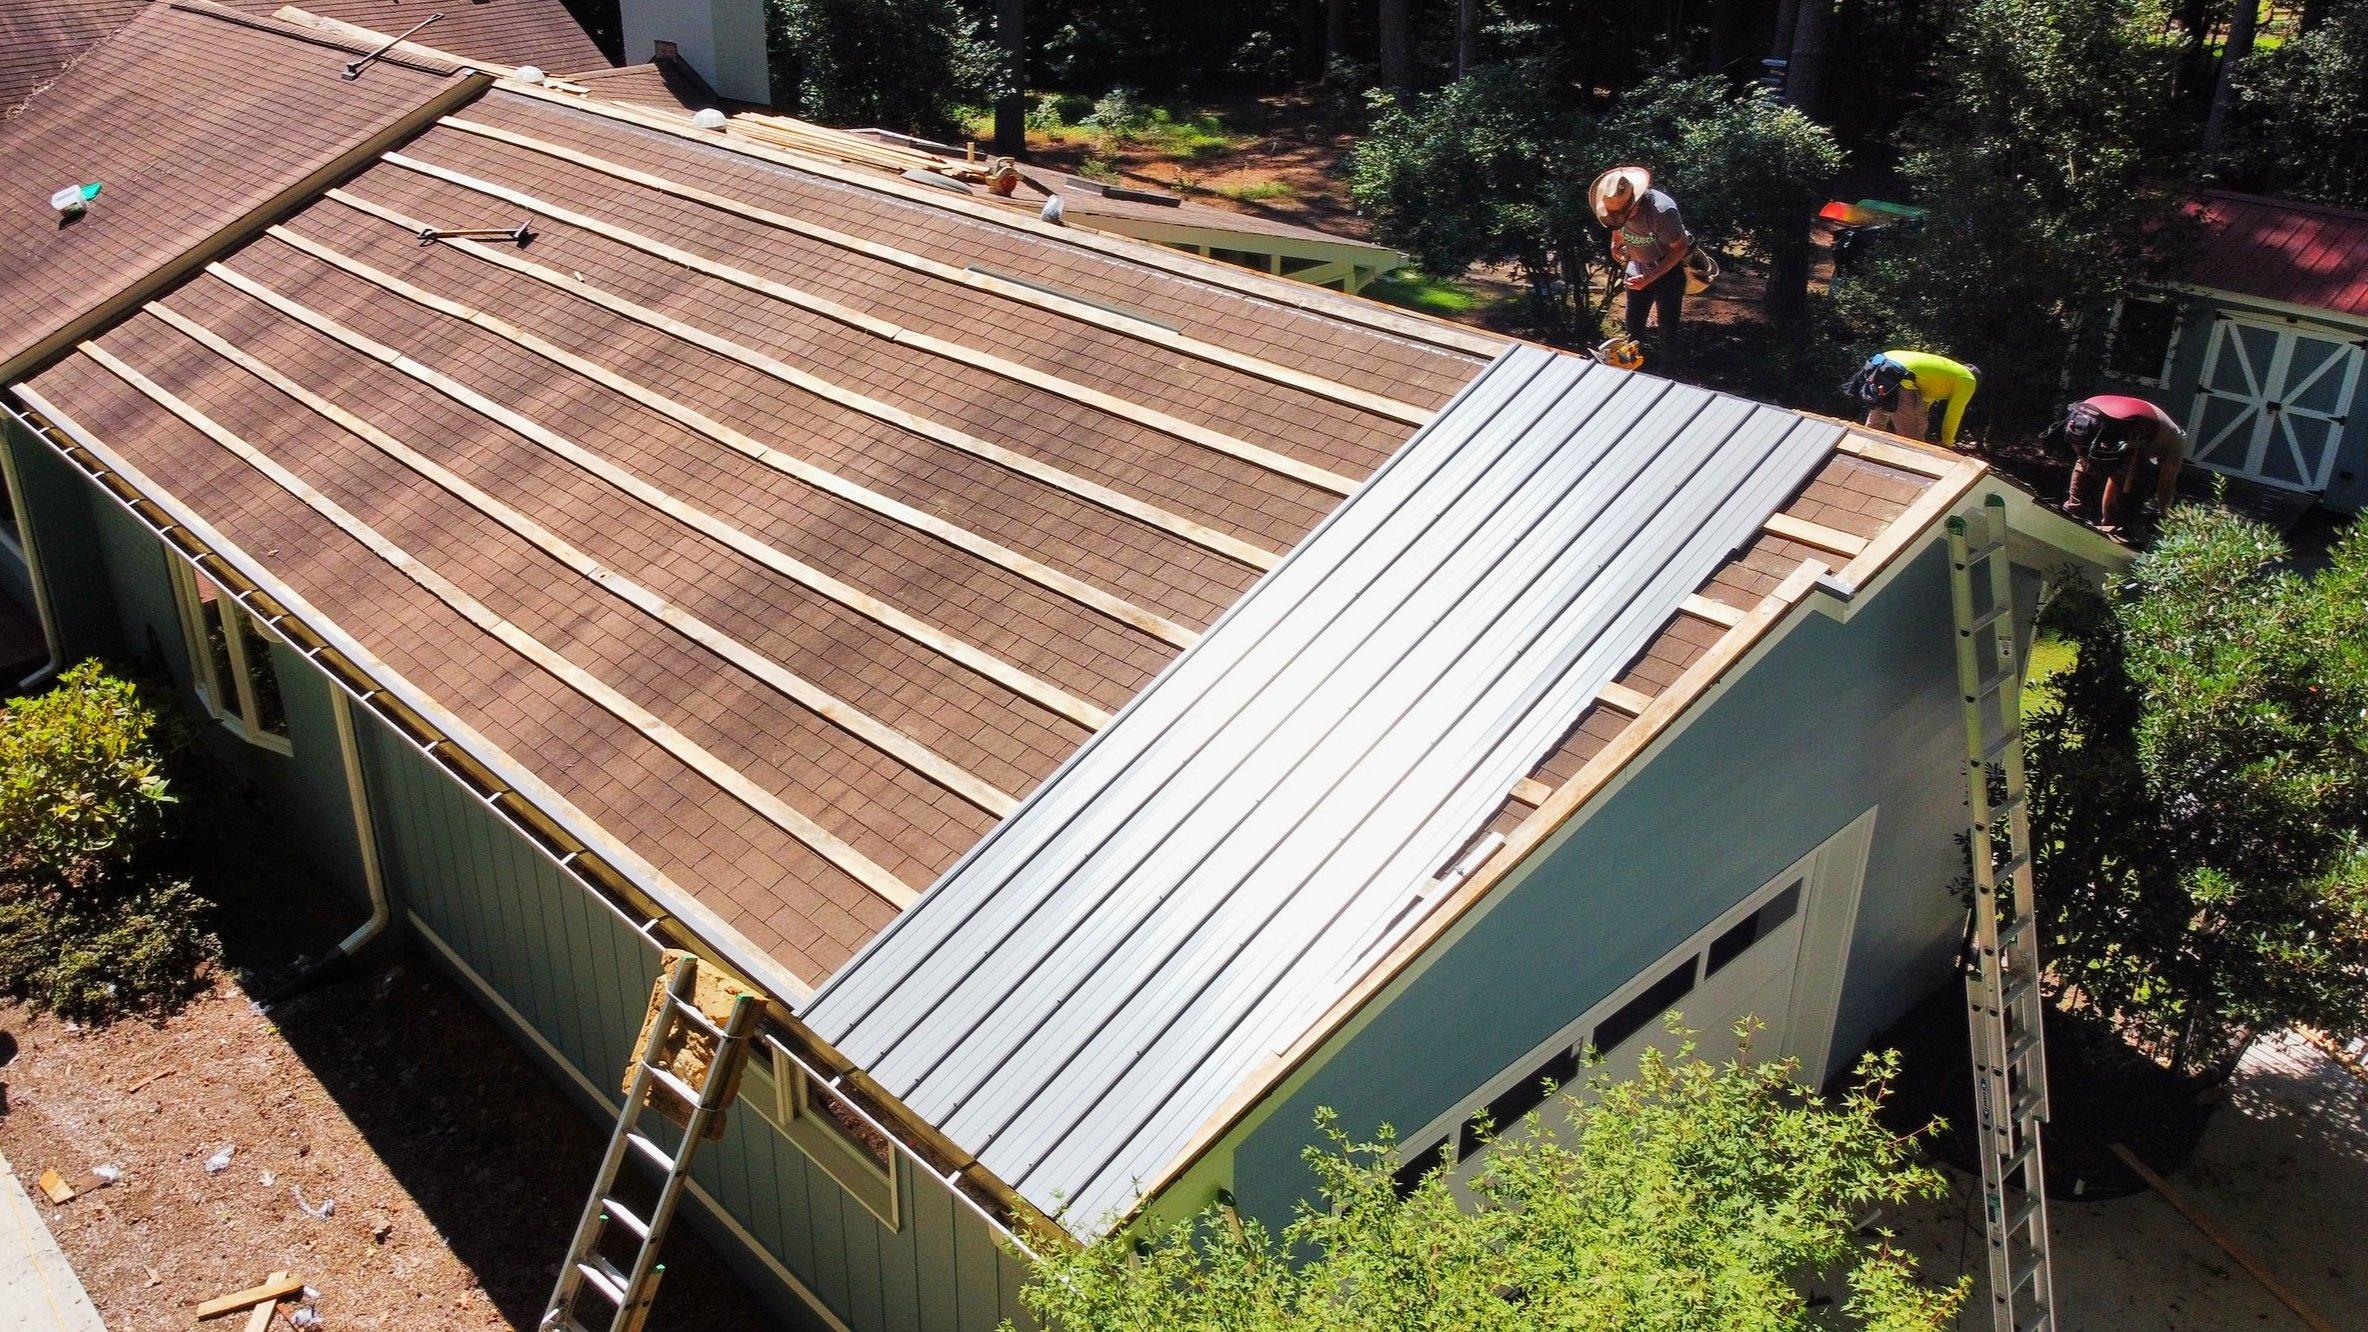 Metal Roof: Purlins or Sheathing? Making the Right Choice